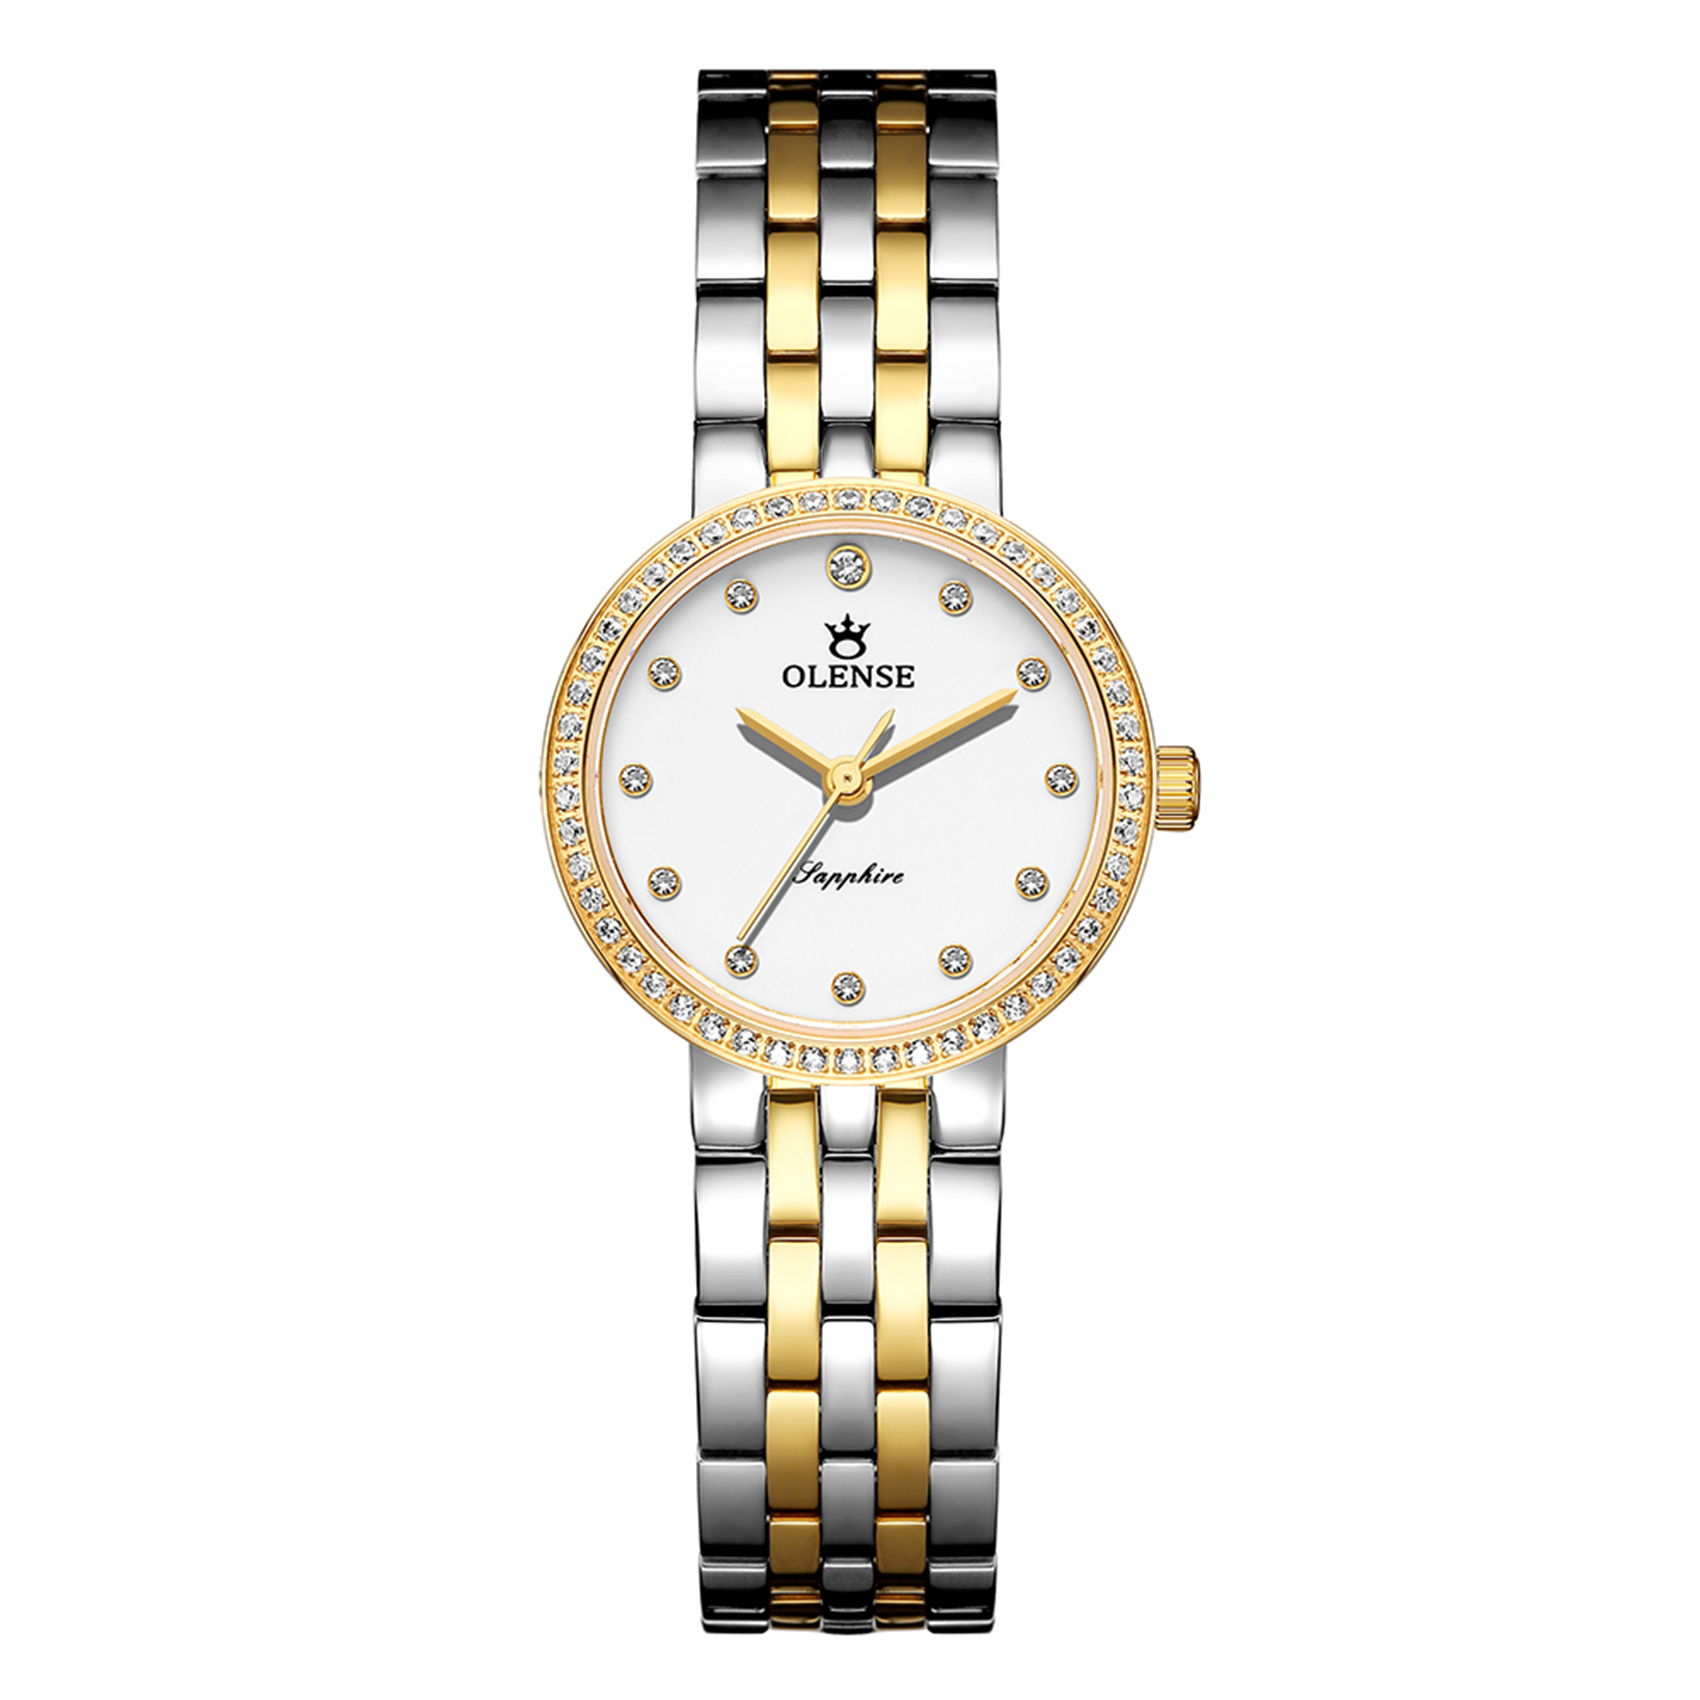 OLENSE - Luxury Watch for Women, Stainless Steel, 25mm, Silver & Gold